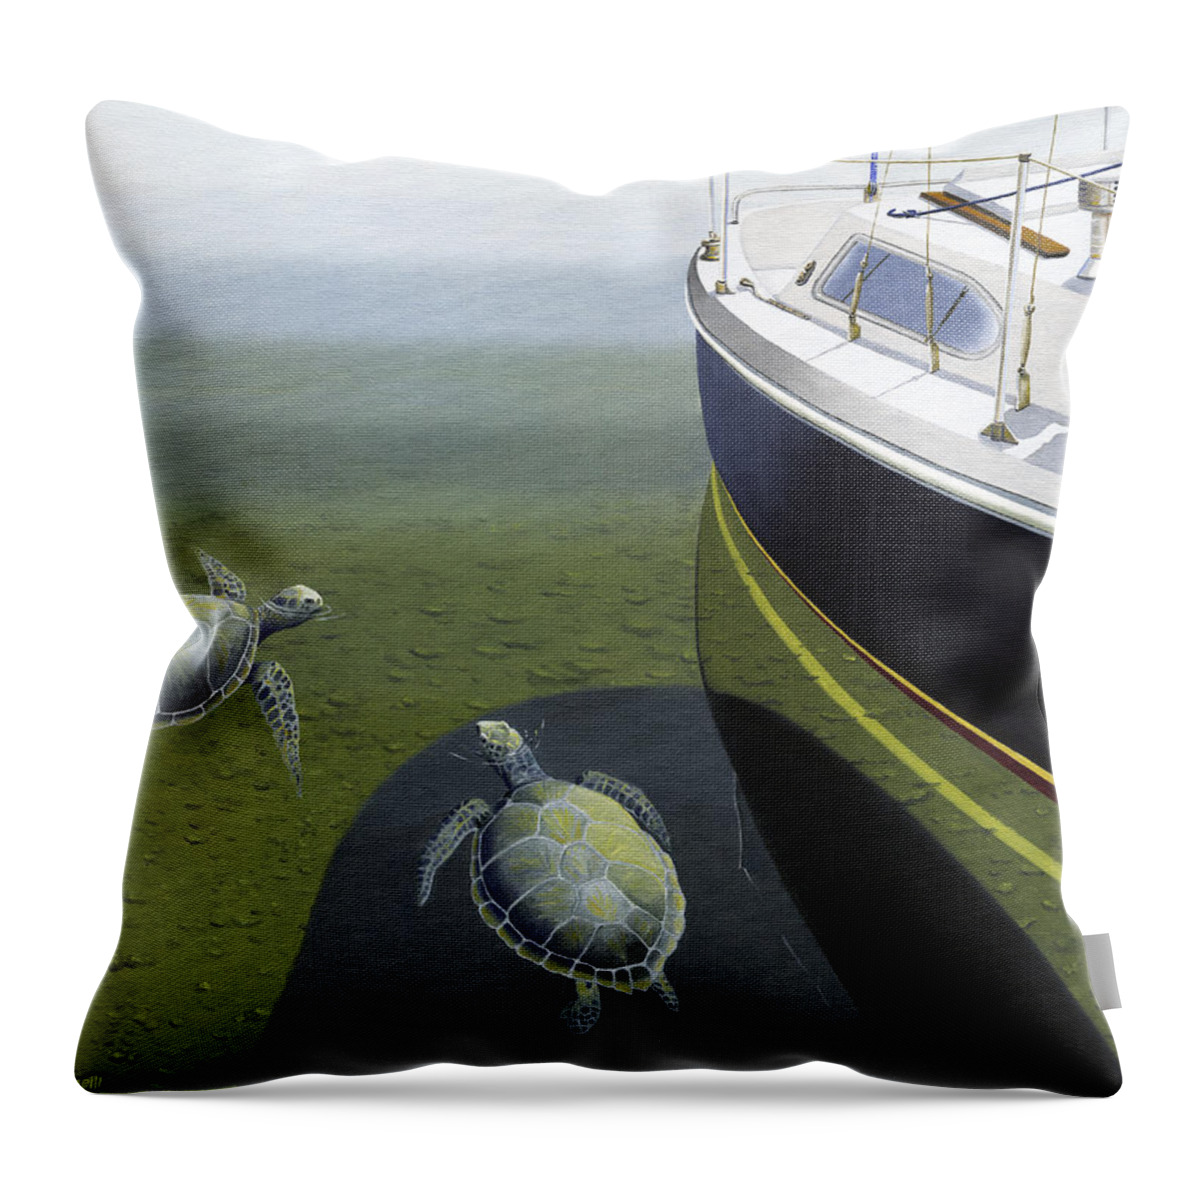 Sail Boat Throw Pillow featuring the painting The Curiosity Of Sea Turtles by Gary Giacomelli